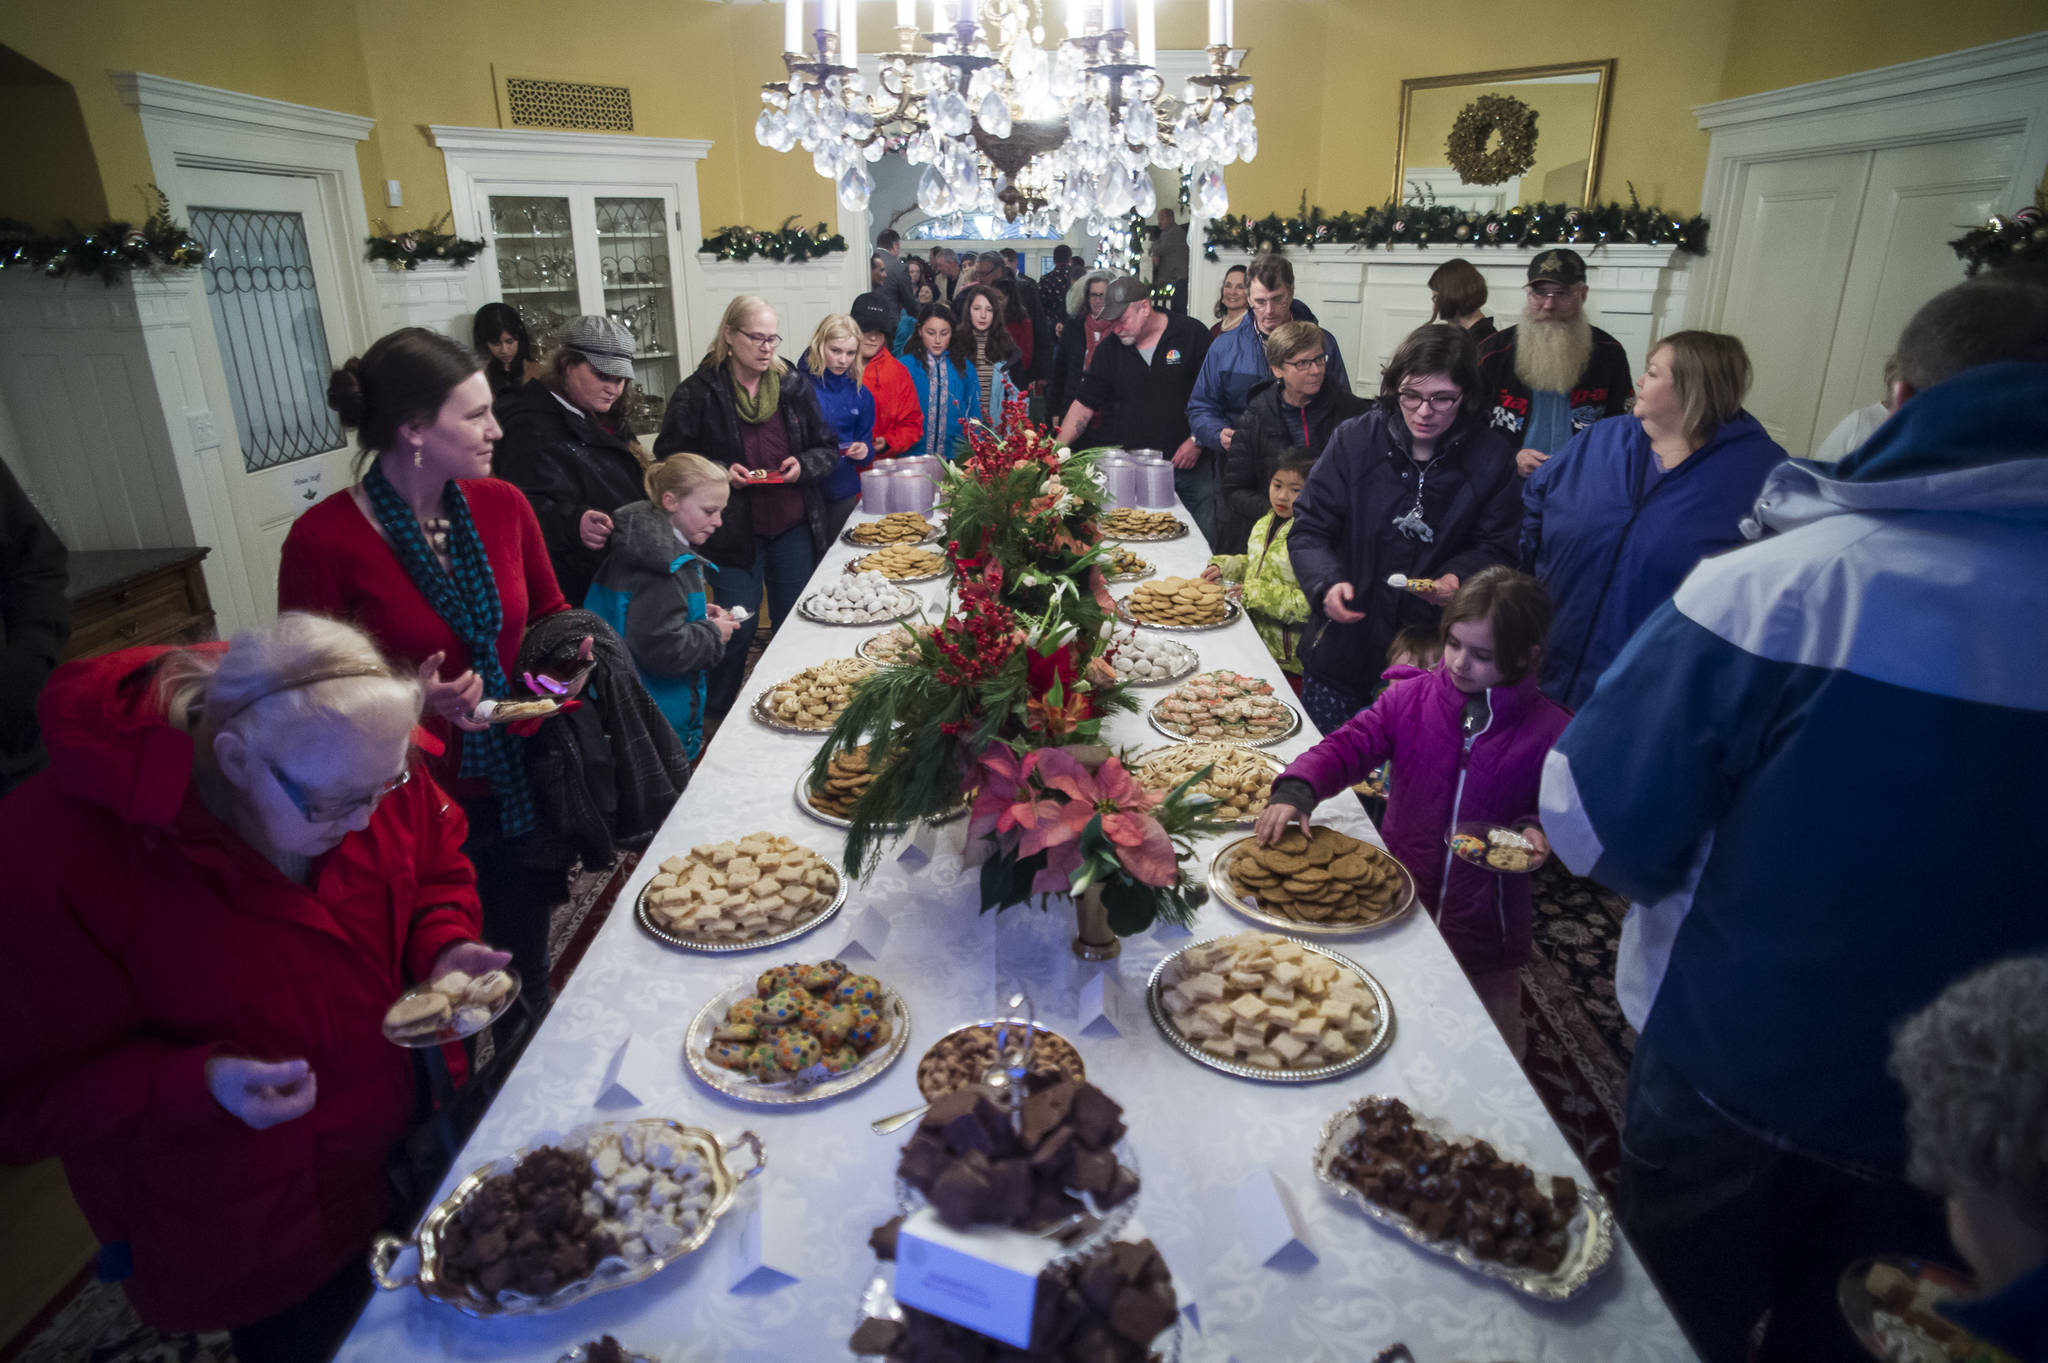 Juneau residents file through the dining room for cookies at the Governor’s Open House on Tuesday, Dec. 11, 2018. (Michael Penn | Juneau Empire)